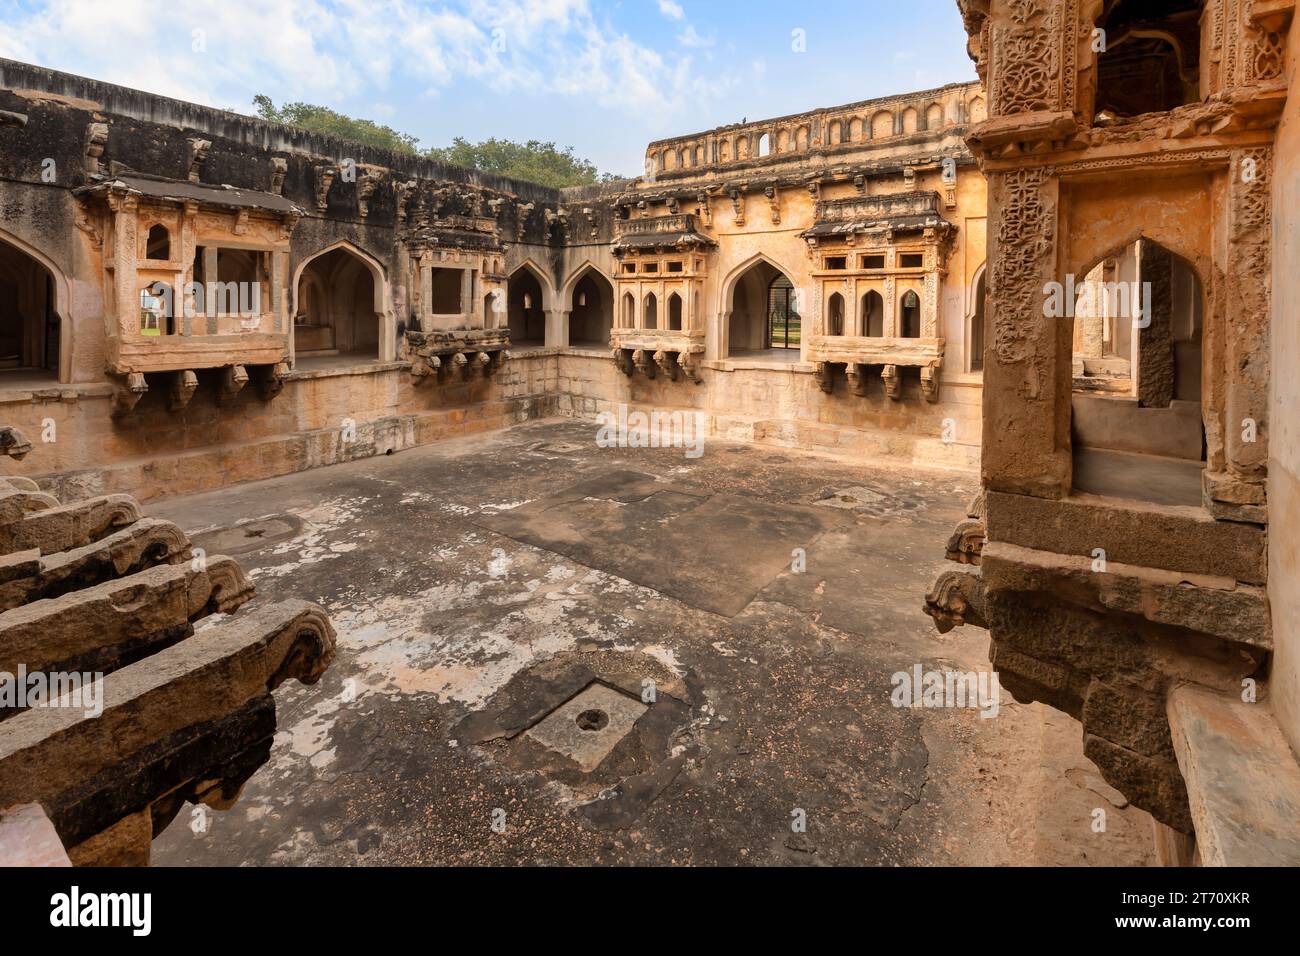 Ancient architecture ruins of Queen's bath in the medieval royal enclave at Hampi, Karnataka India Stock Photo